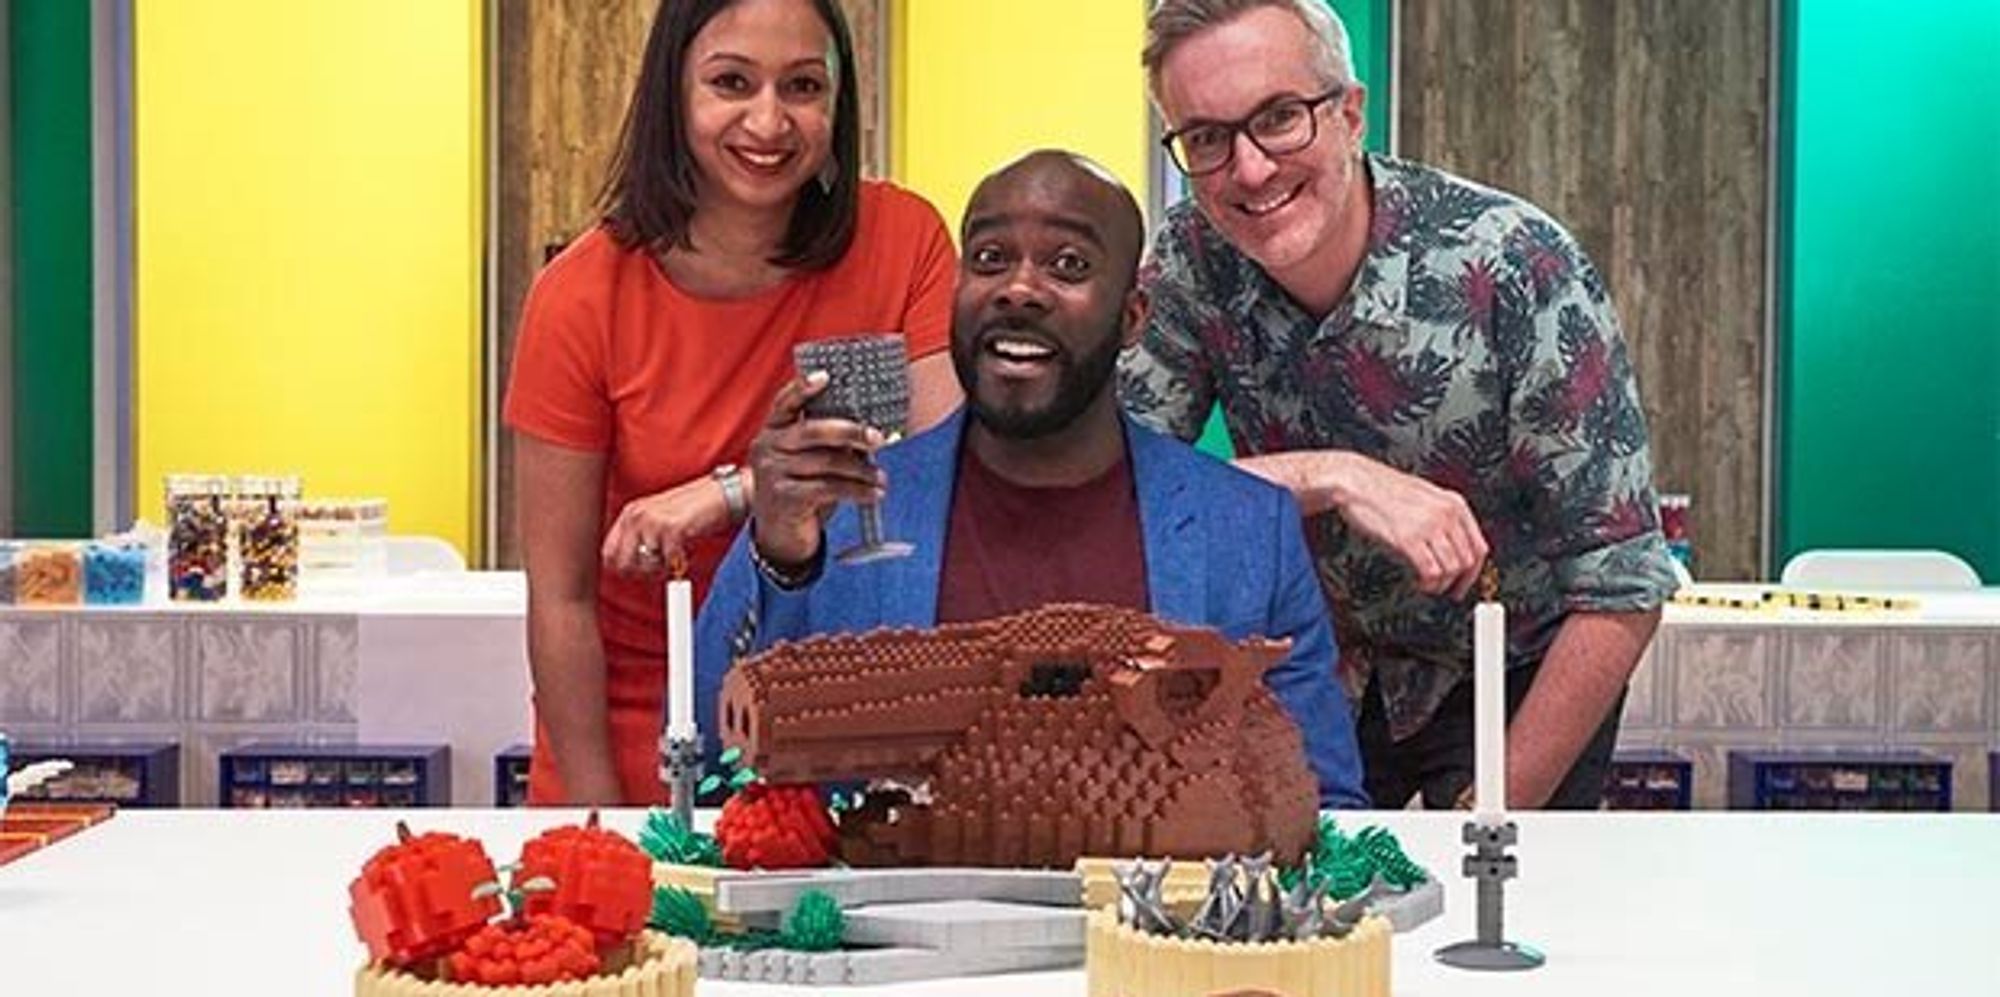 ‘LEGO Masters’ Is Set To Do For LEGO What ‘Great British Bake Off’ Did For ...